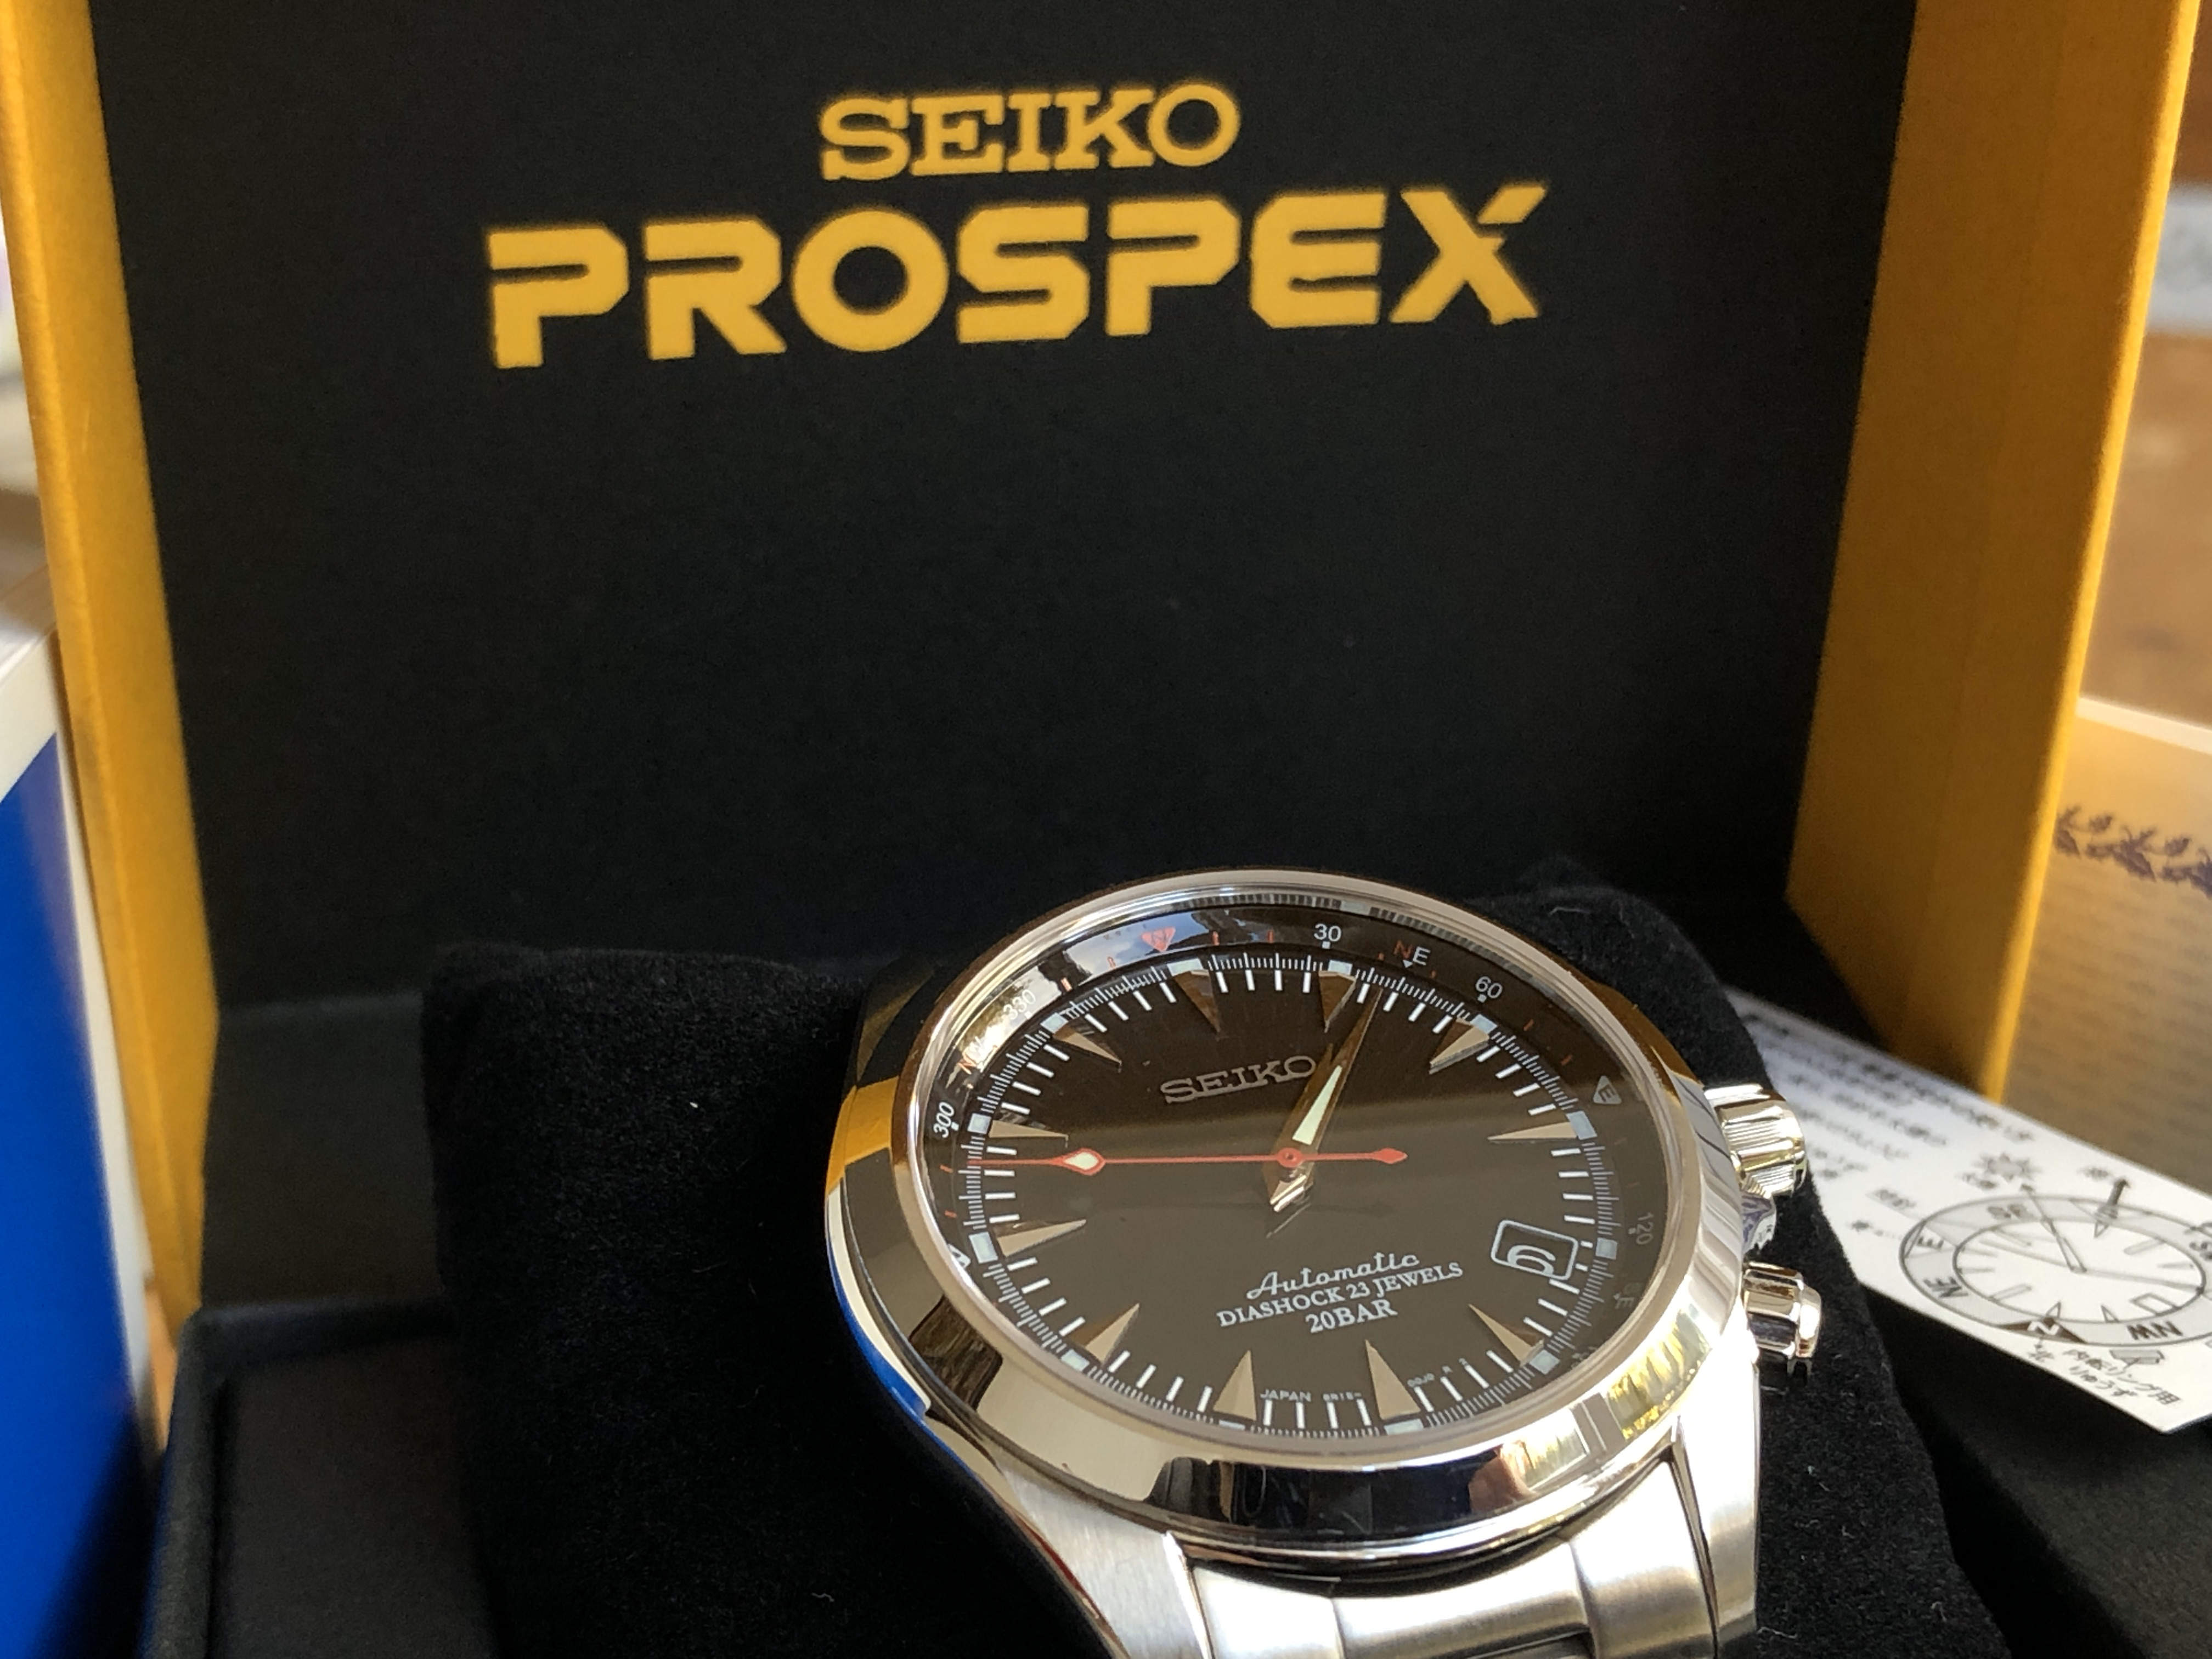 Seiko Alpinist SARB015 Full set with box & papers (Sold)